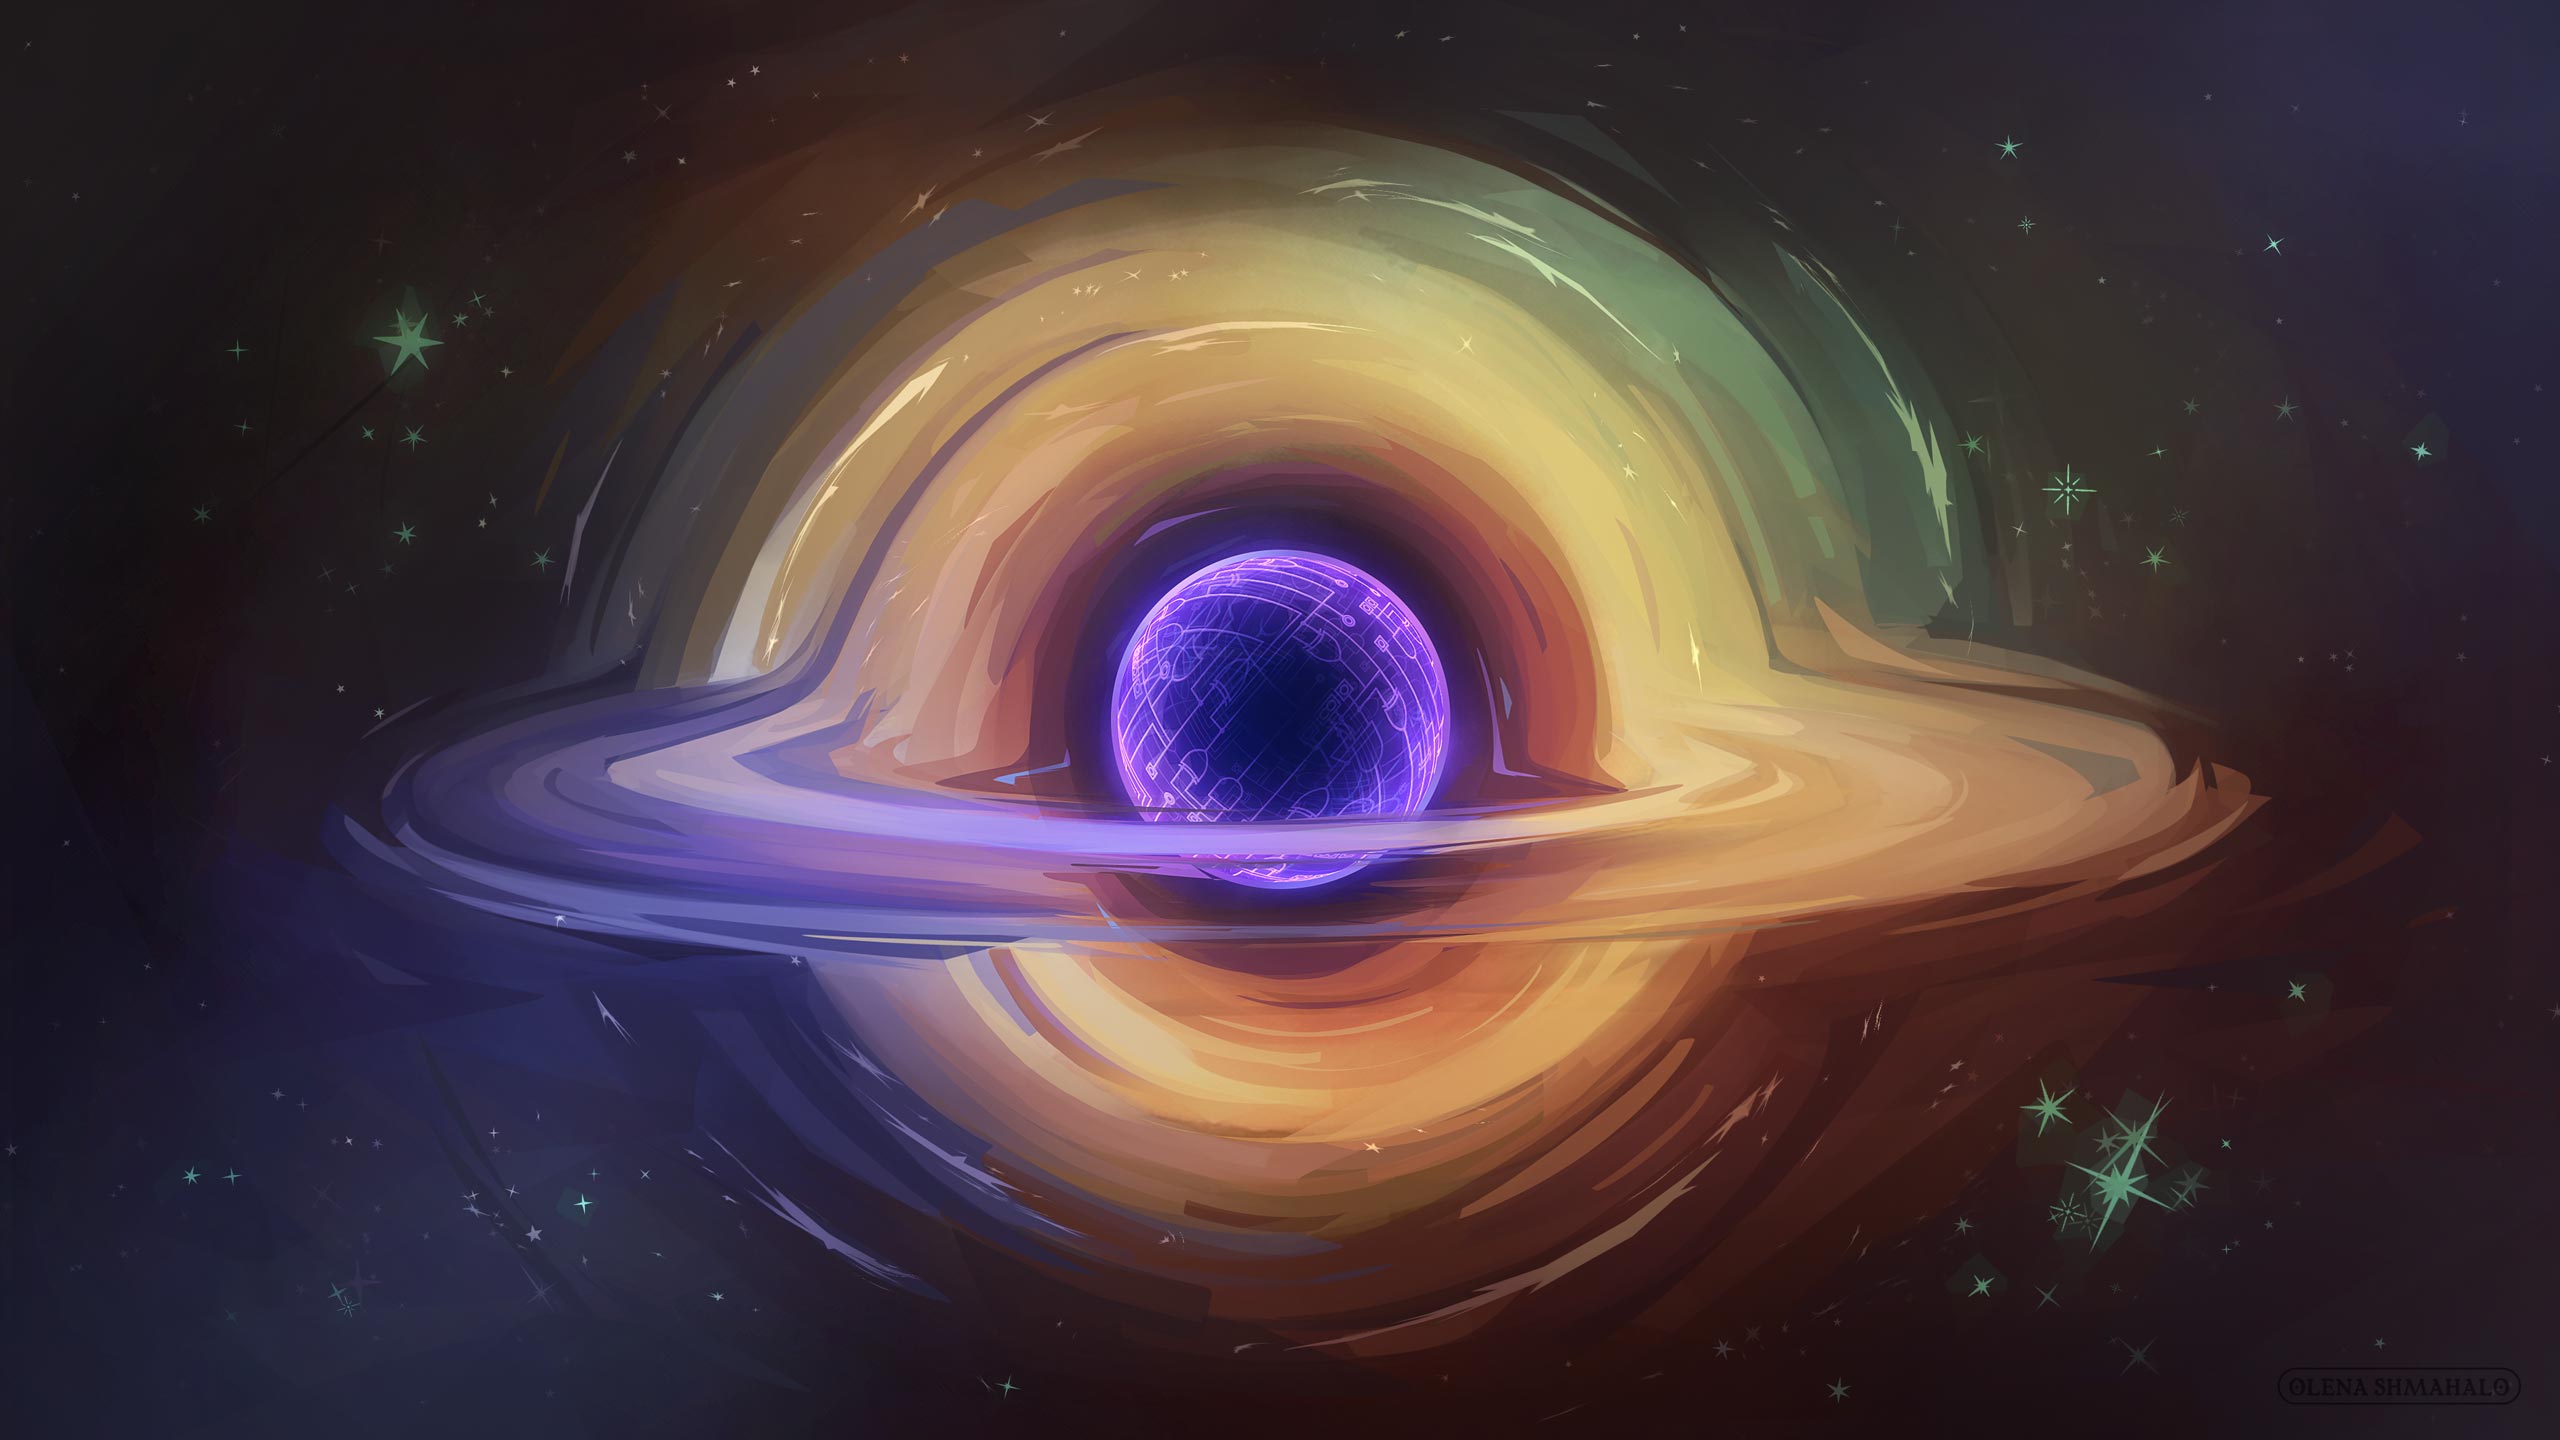 Stylized illustration of a black hole in space with glowing purple circuitry wrapping the inner sphere.